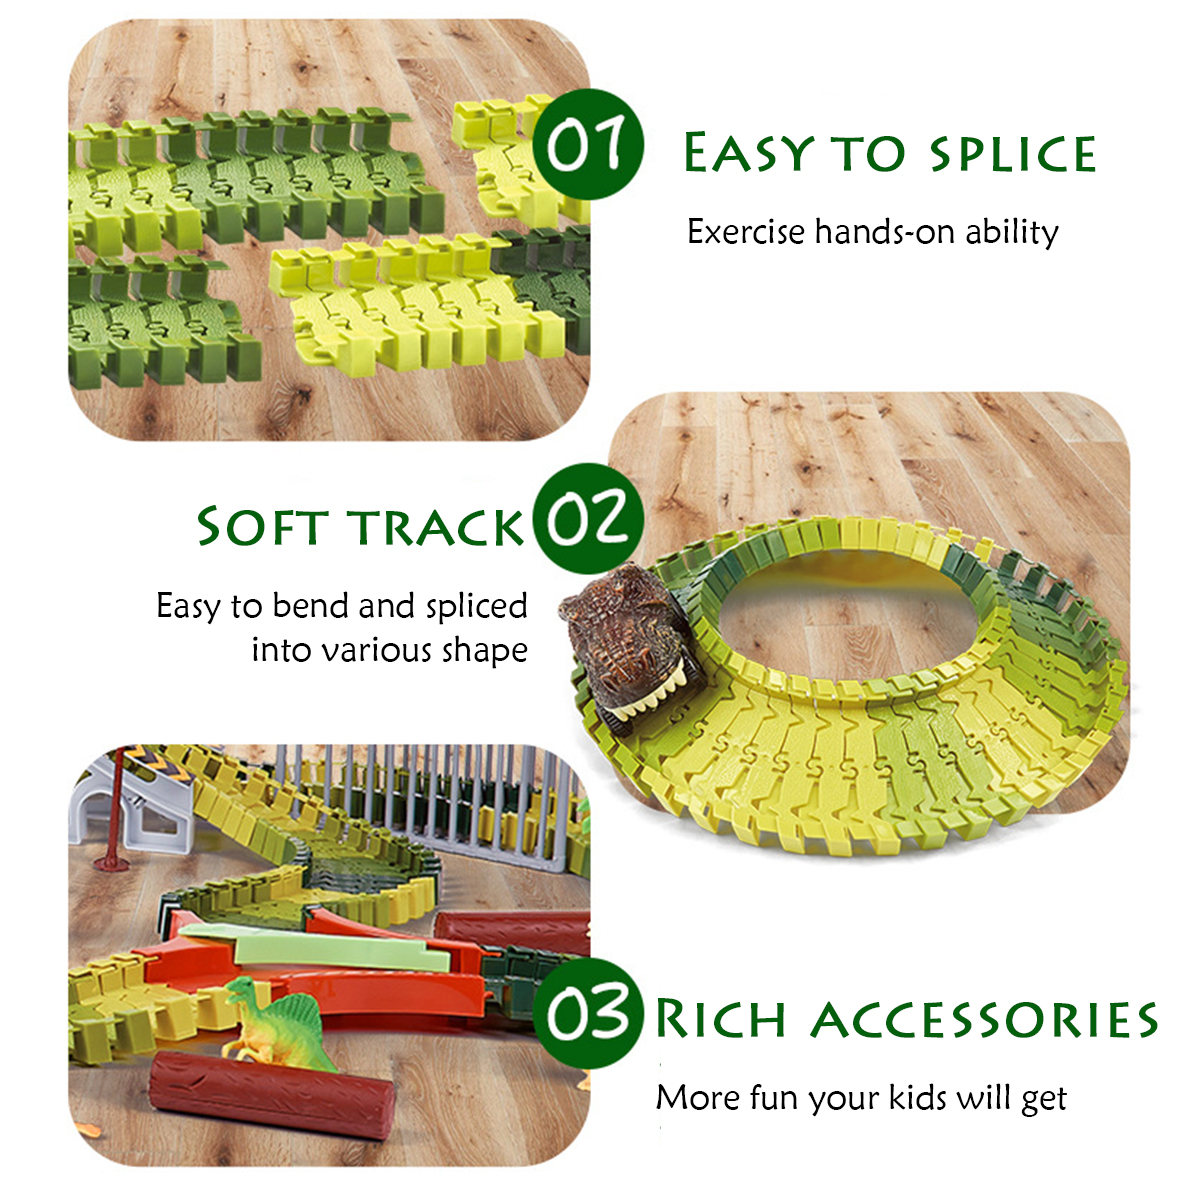 Dinosaur-World-Flexible-Racing-Car-Track-Toys-Construction-Play-Game-Educational-Set-Toy-for-Kids-Gi-1693947-7